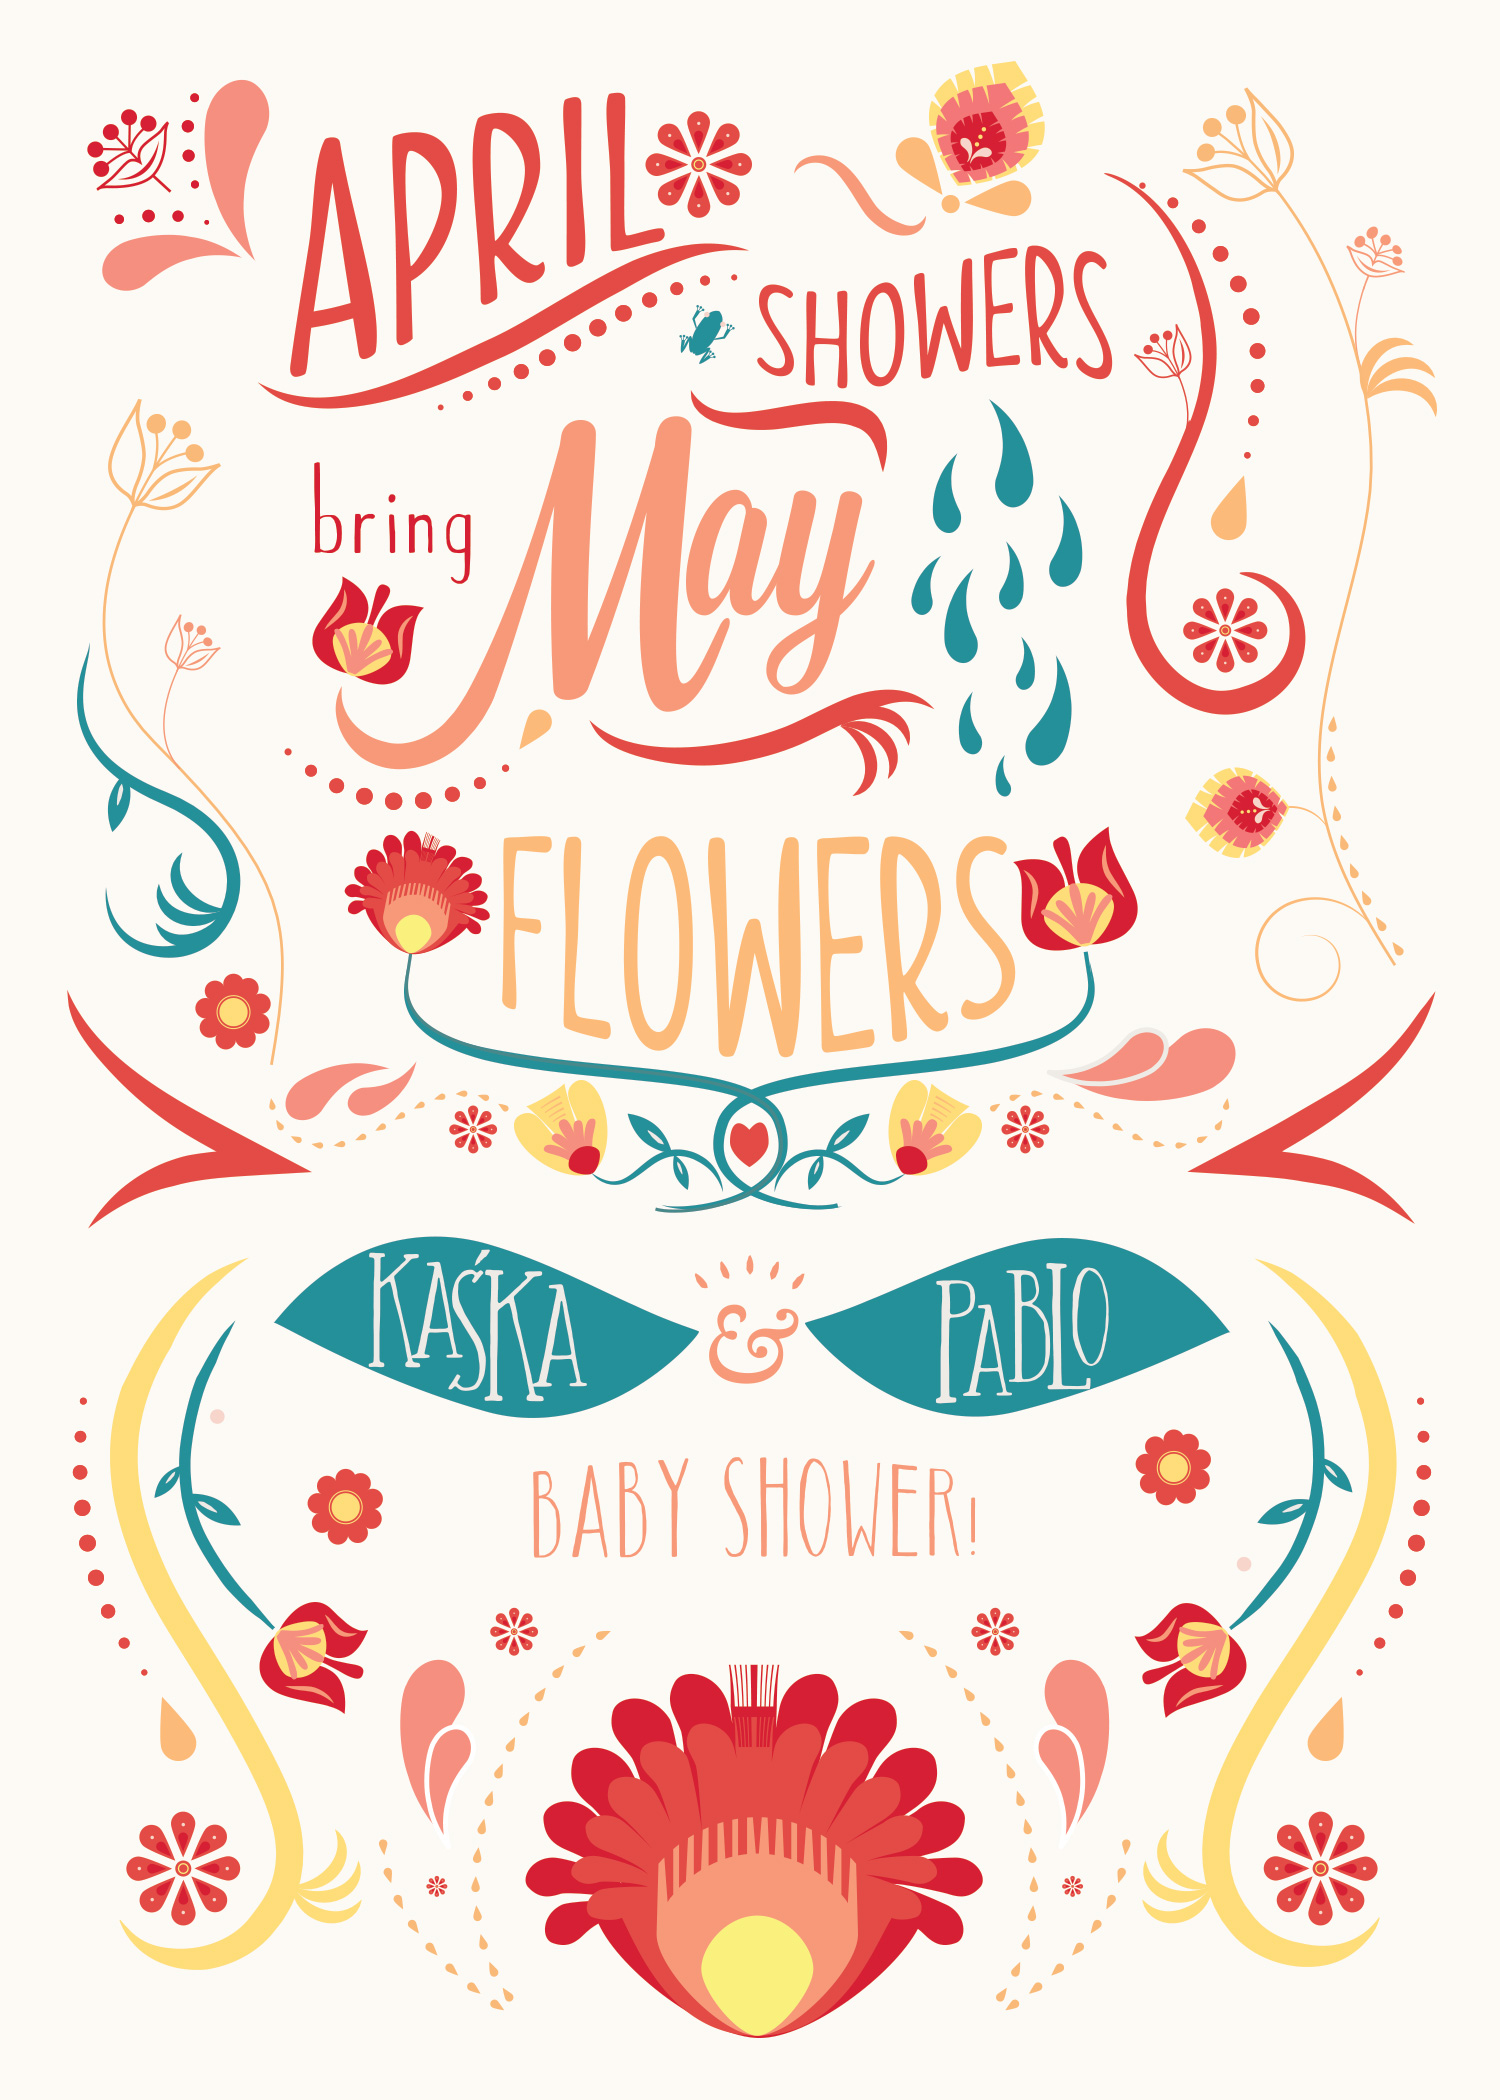 April Showers Bring May Flowers Images - April Showers Bring May Flowers Poster - HD Wallpaper 